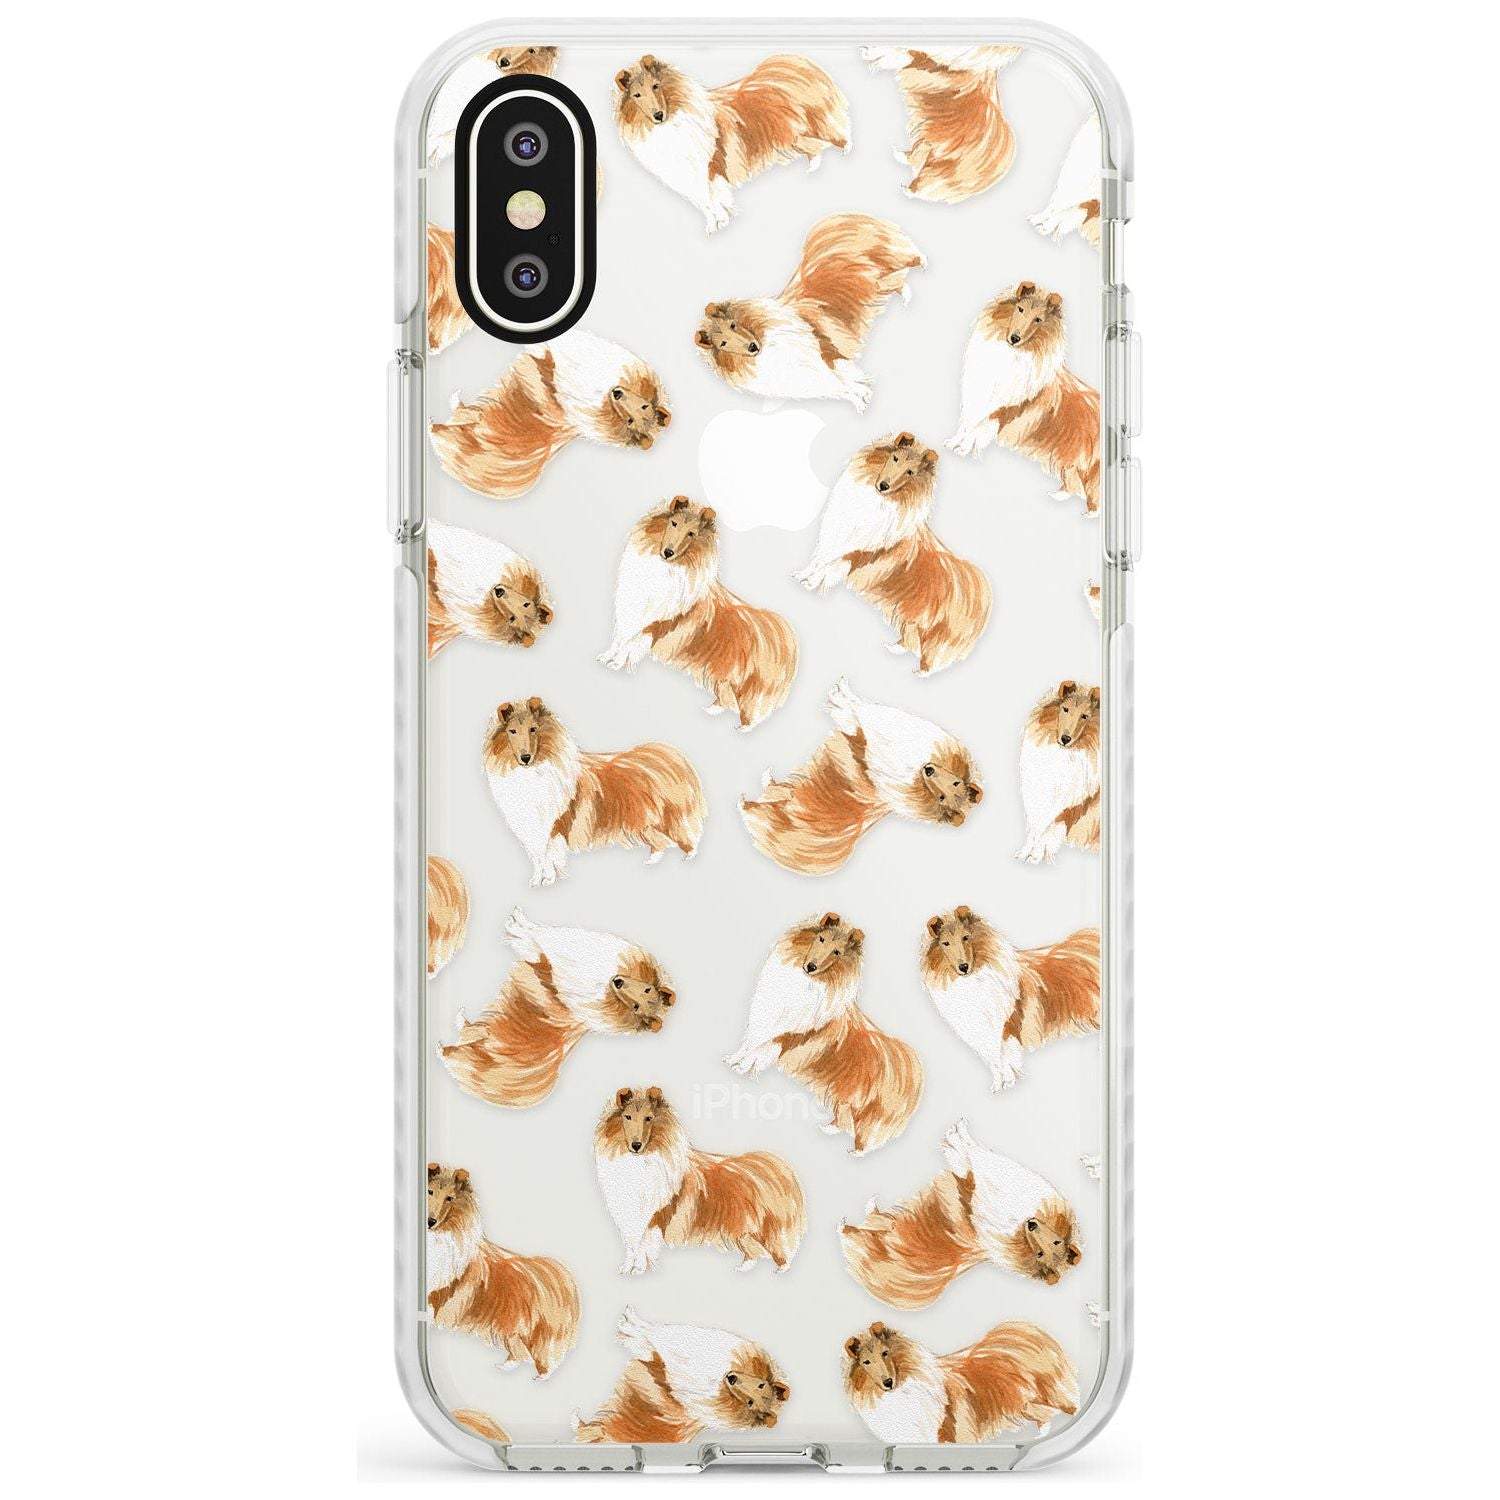 Rough Collie Watercolour Dog Pattern Impact Phone Case for iPhone X XS Max XR